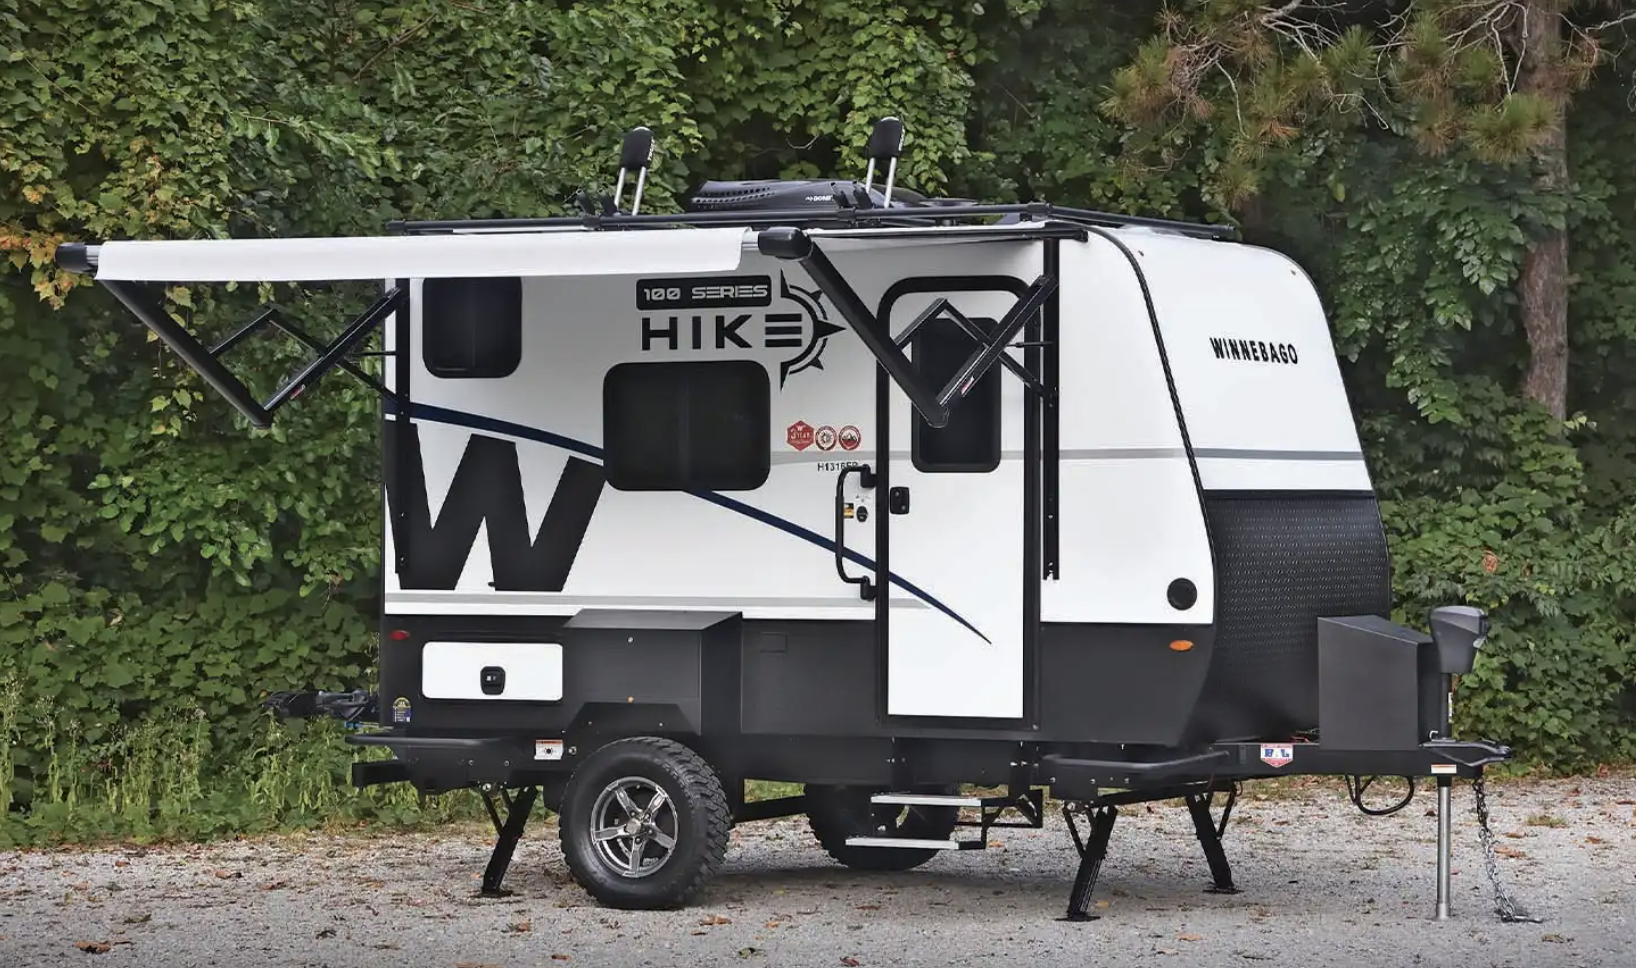 Winnebago Expands Lineup With Campers, Including Tiny Hike 100